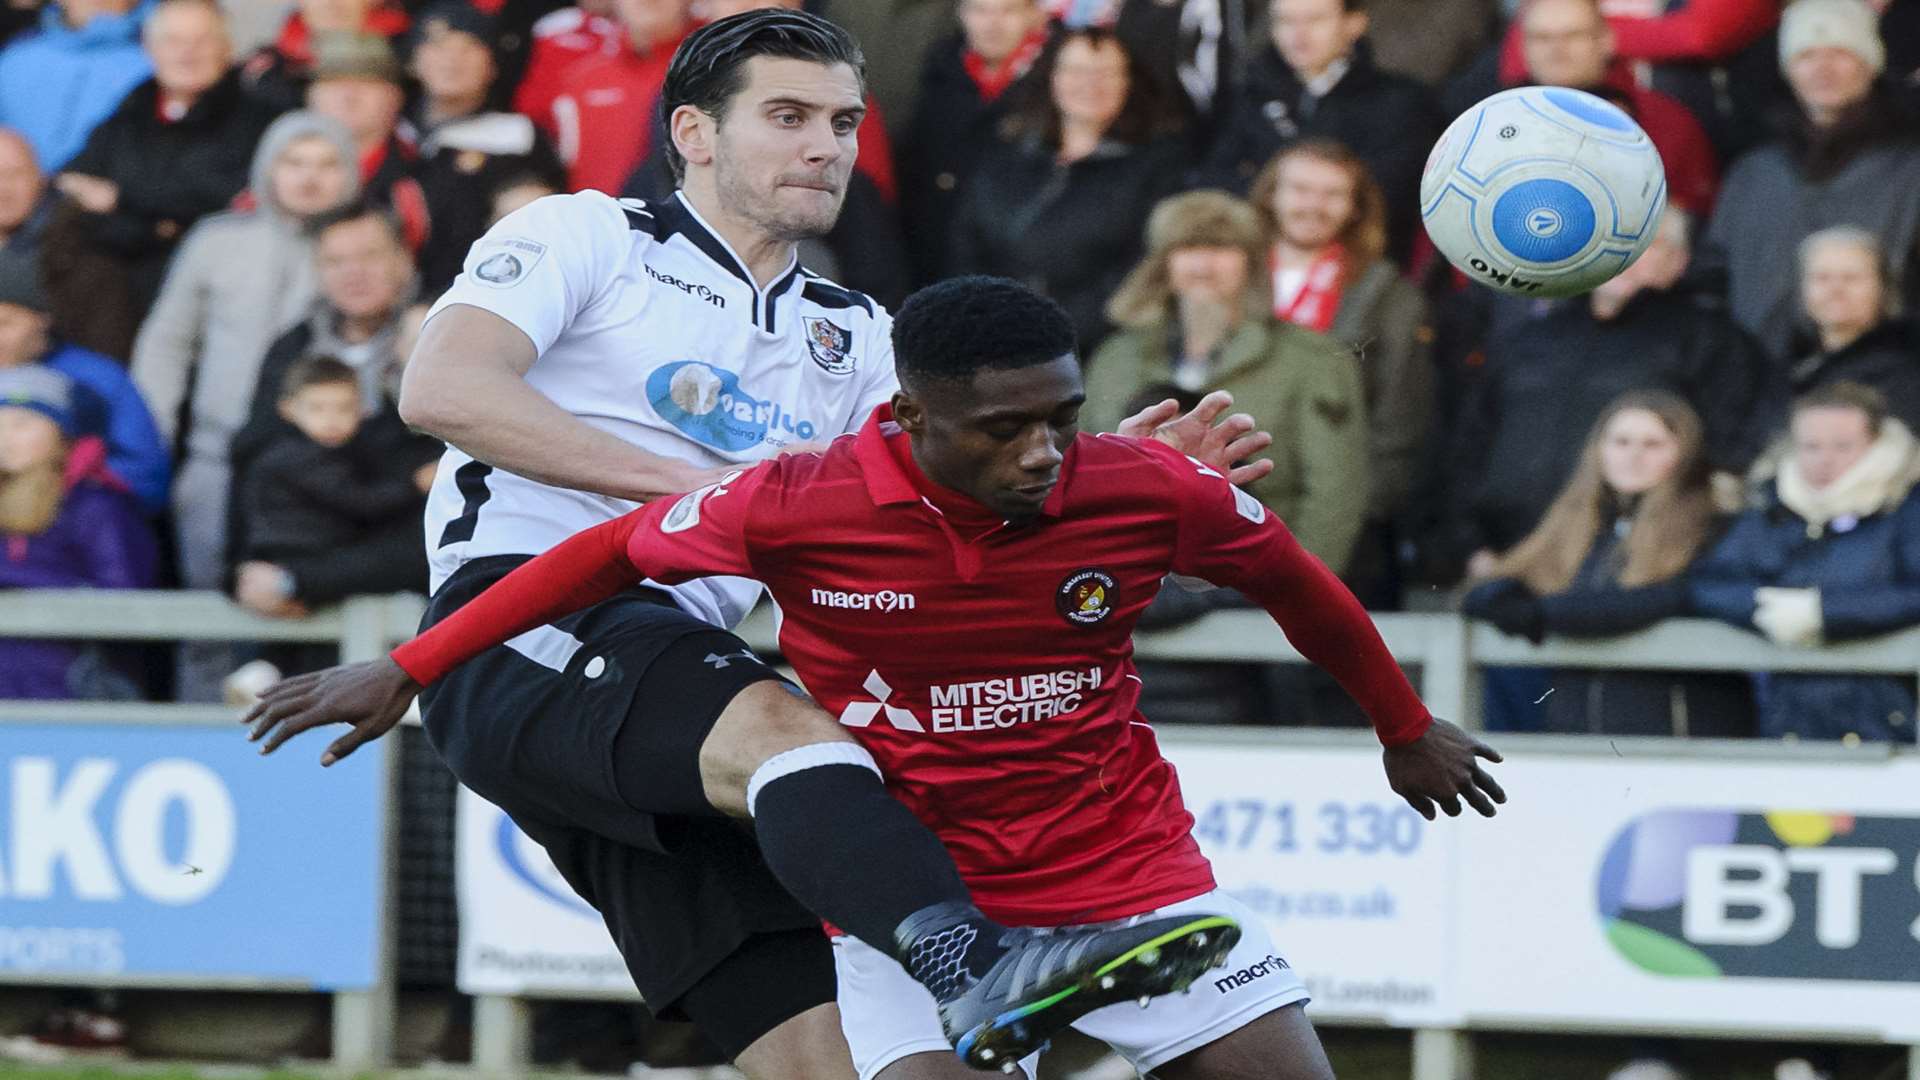 Dartford's former Ebbsfleet player Tom Bonner kept busy by Darren McQueen on Boxing Day Picture: Andy Payton